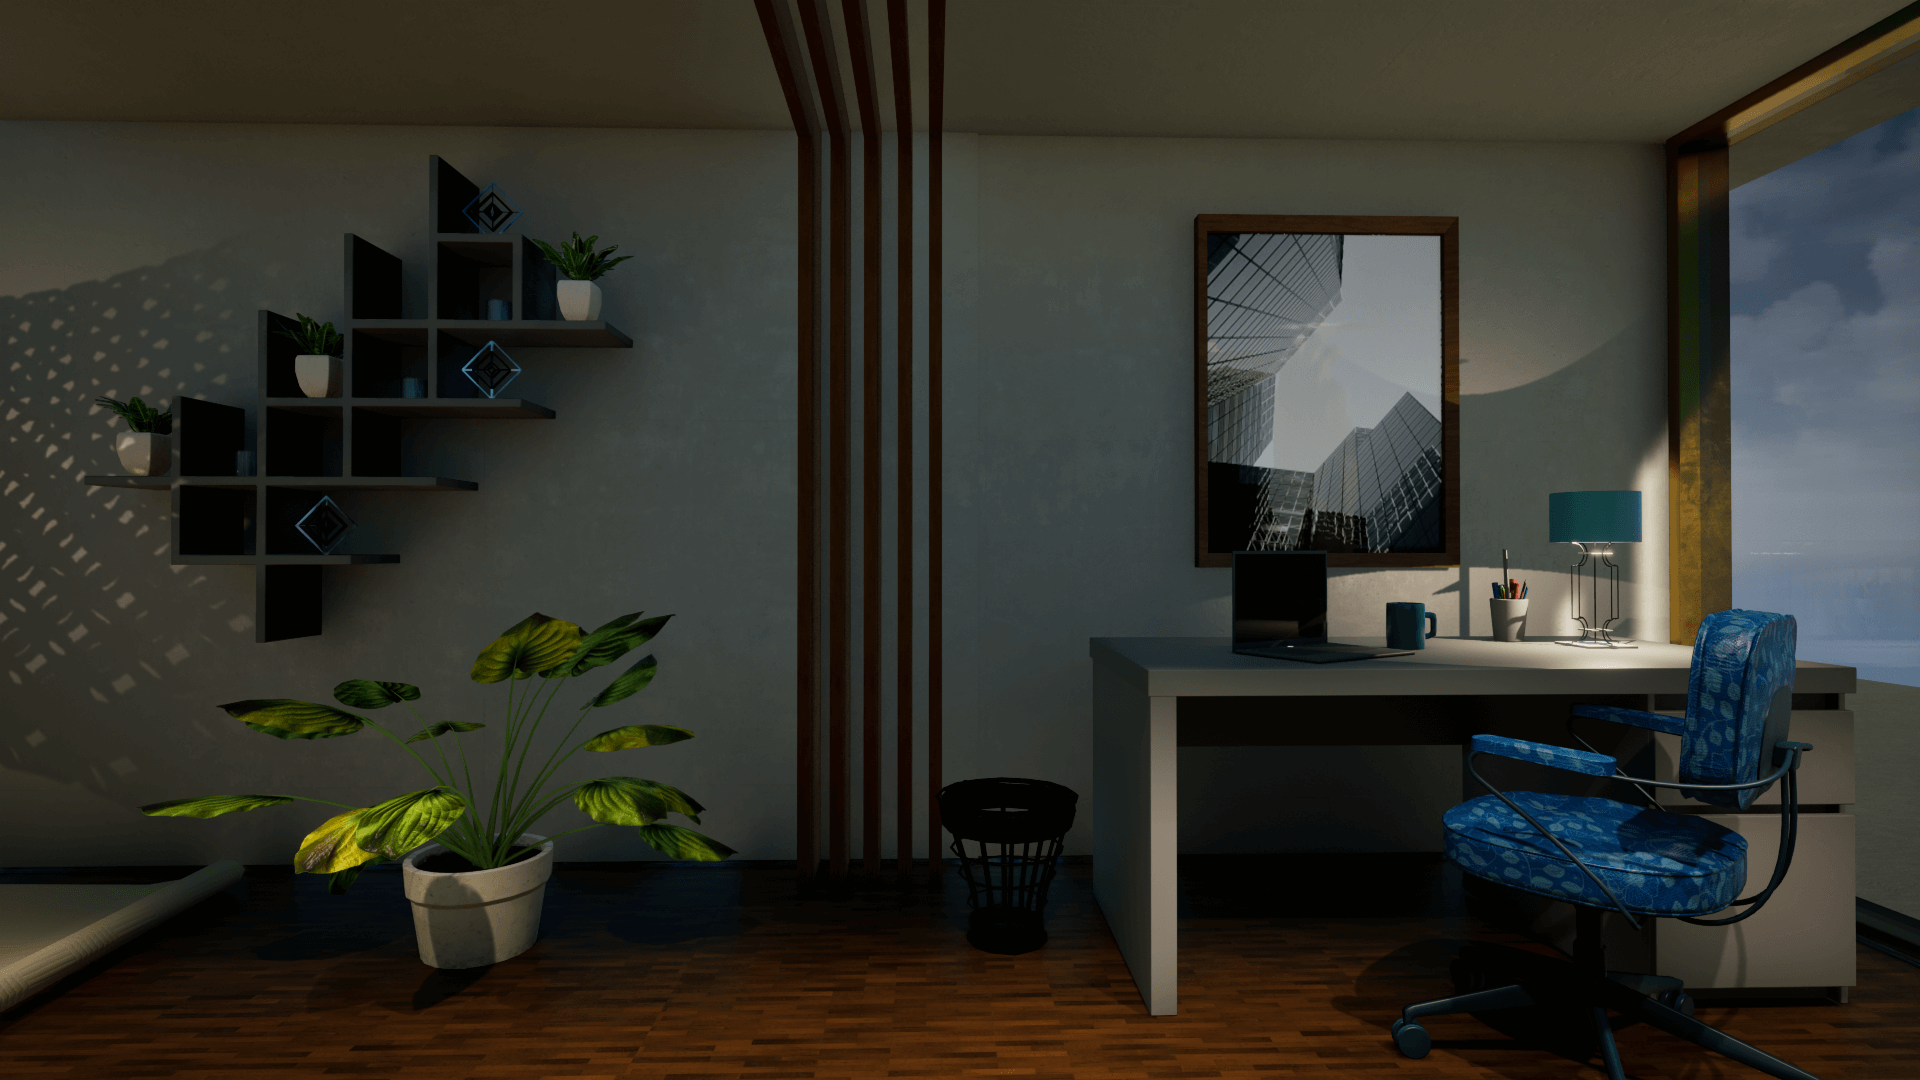 An image showing the Living Room asset pack, created with Unreal Engine